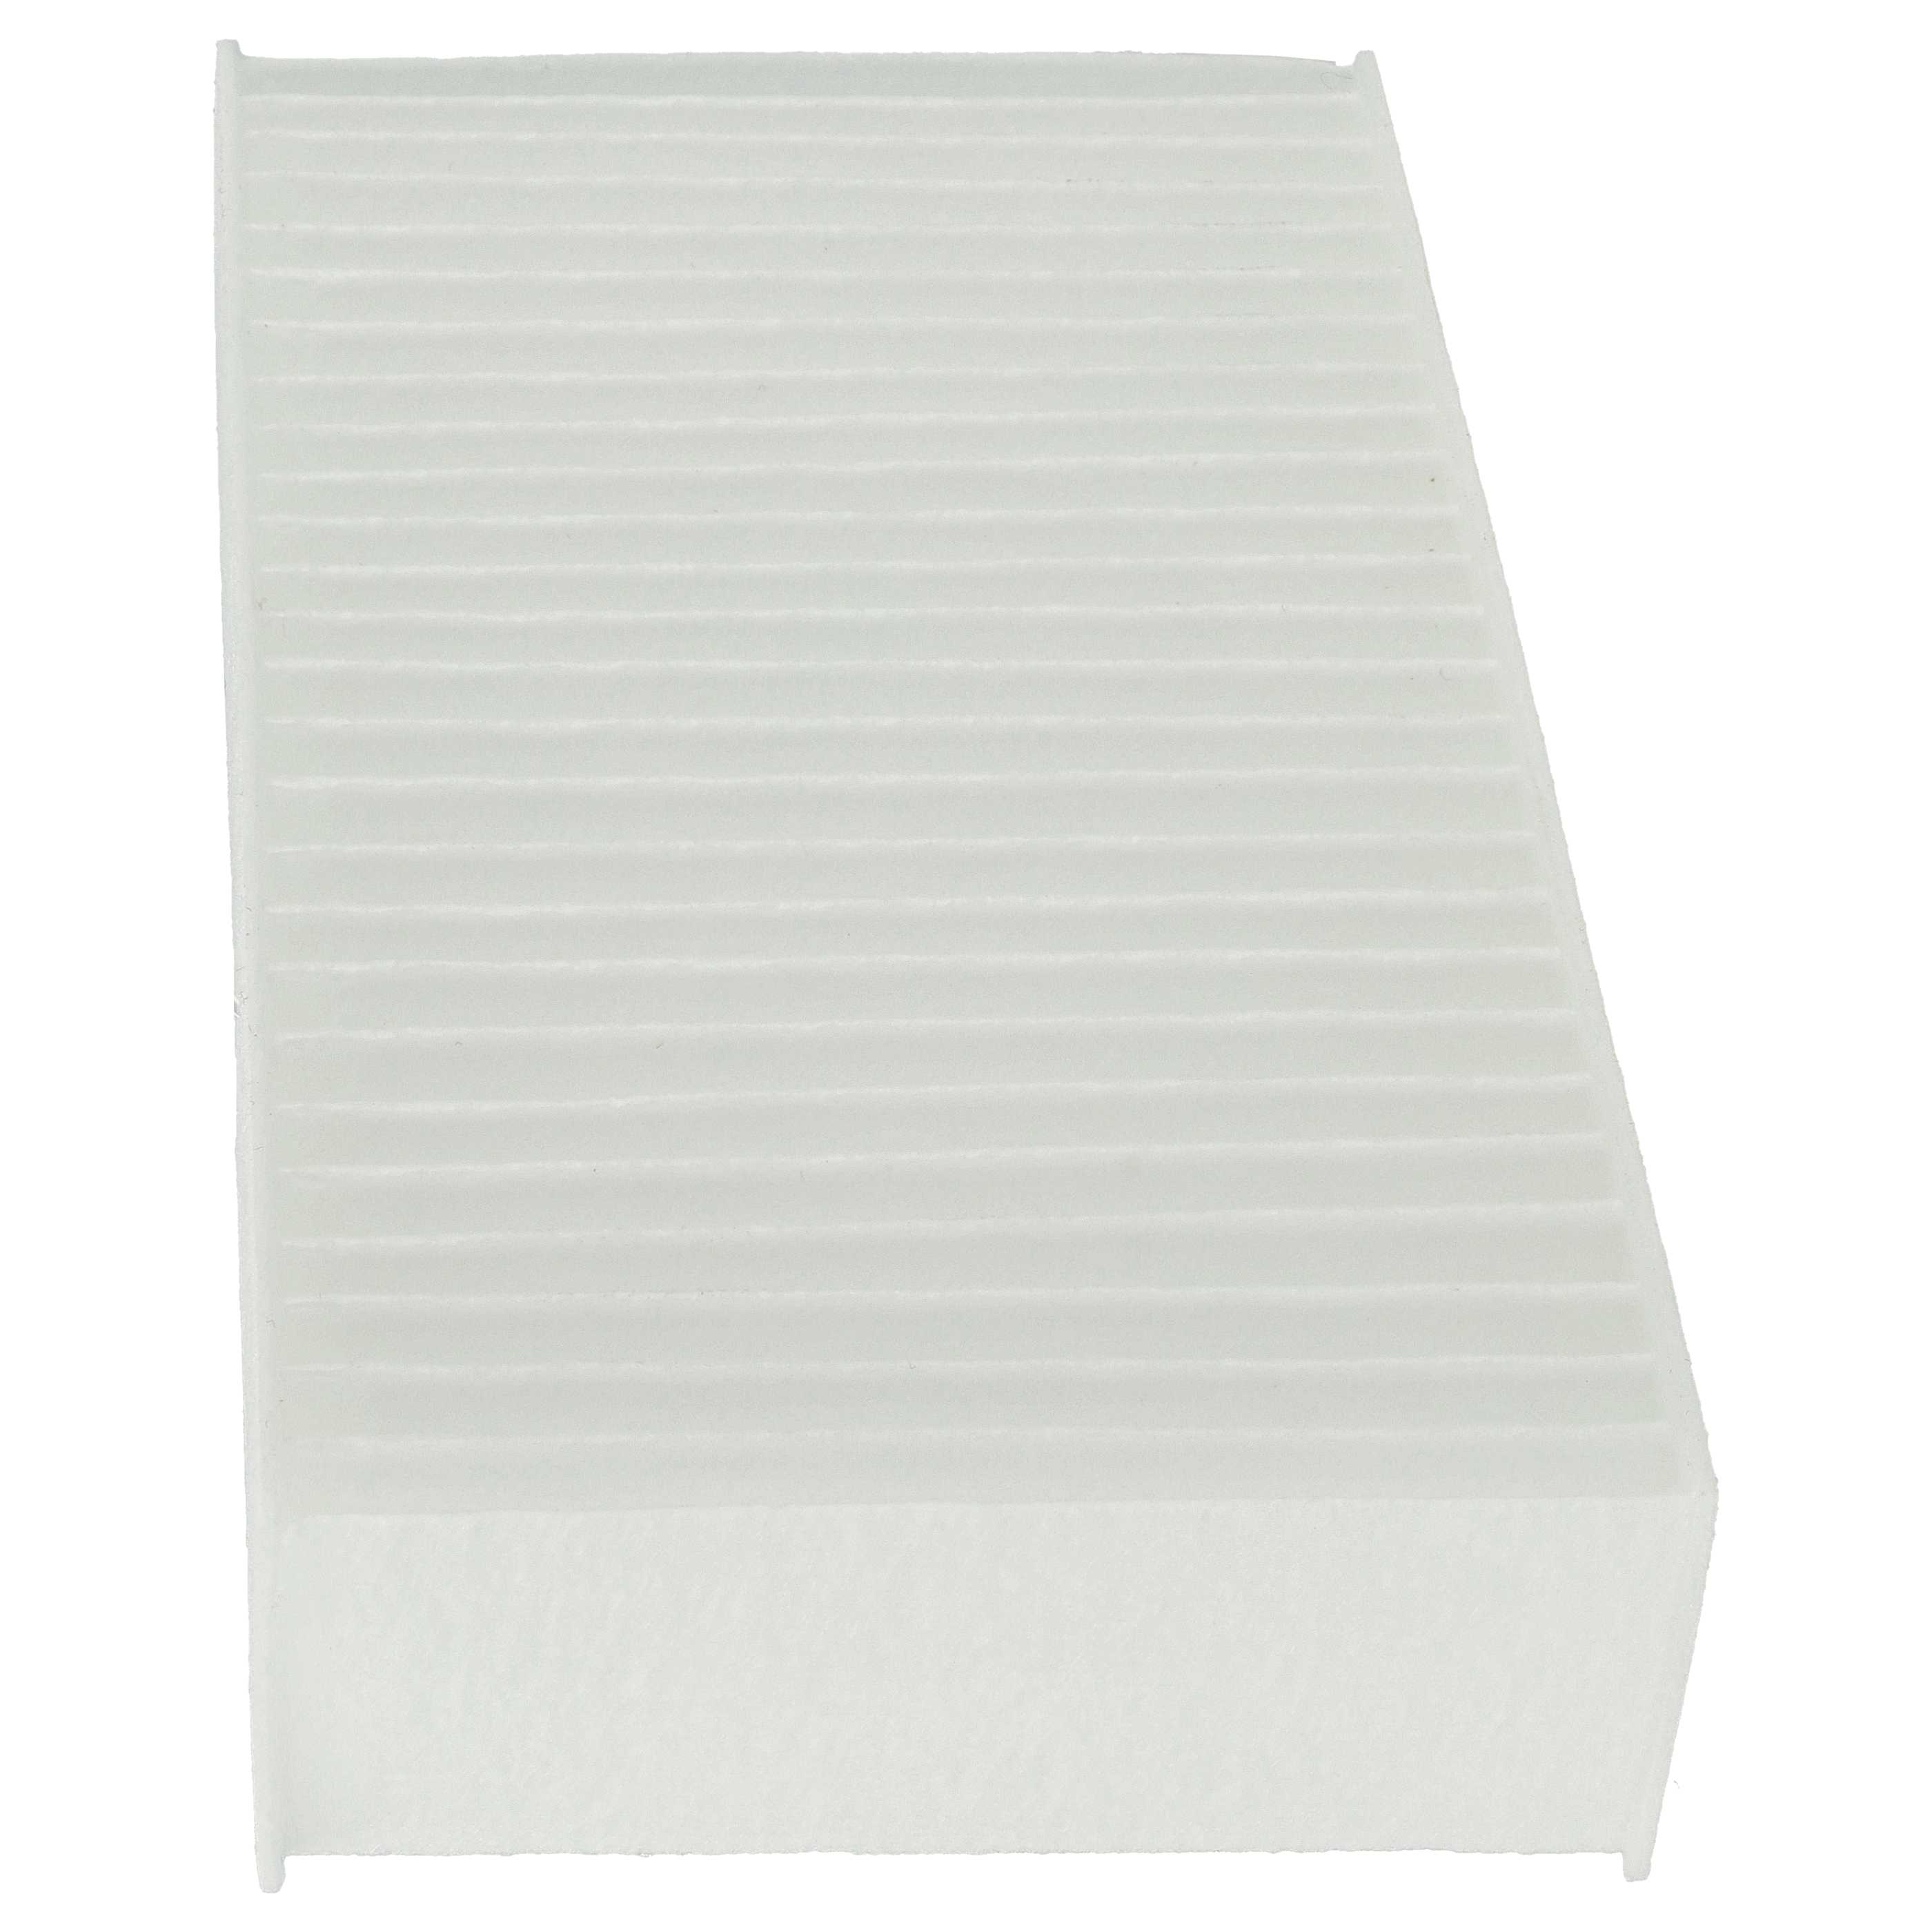 Pollen Filter as Replacement for Miele TF-HG4, 6202520 Tumble Dryer